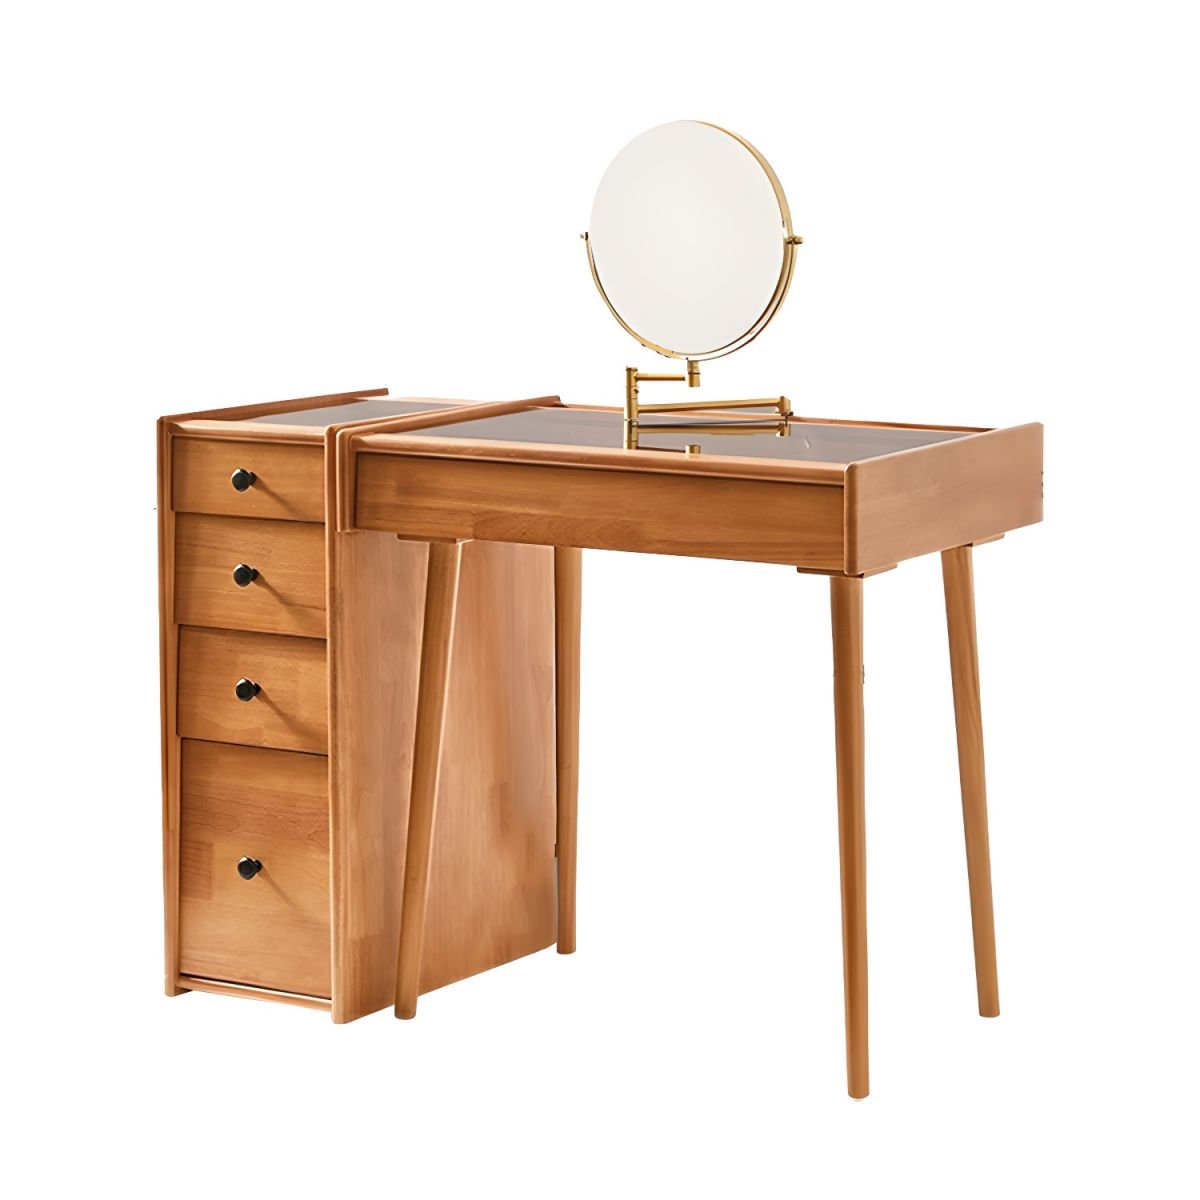 Modern Simple Style Small Dressing Table Lumber Natural Finish with Adjustable Mirror, Makeup Vanity & Mirror